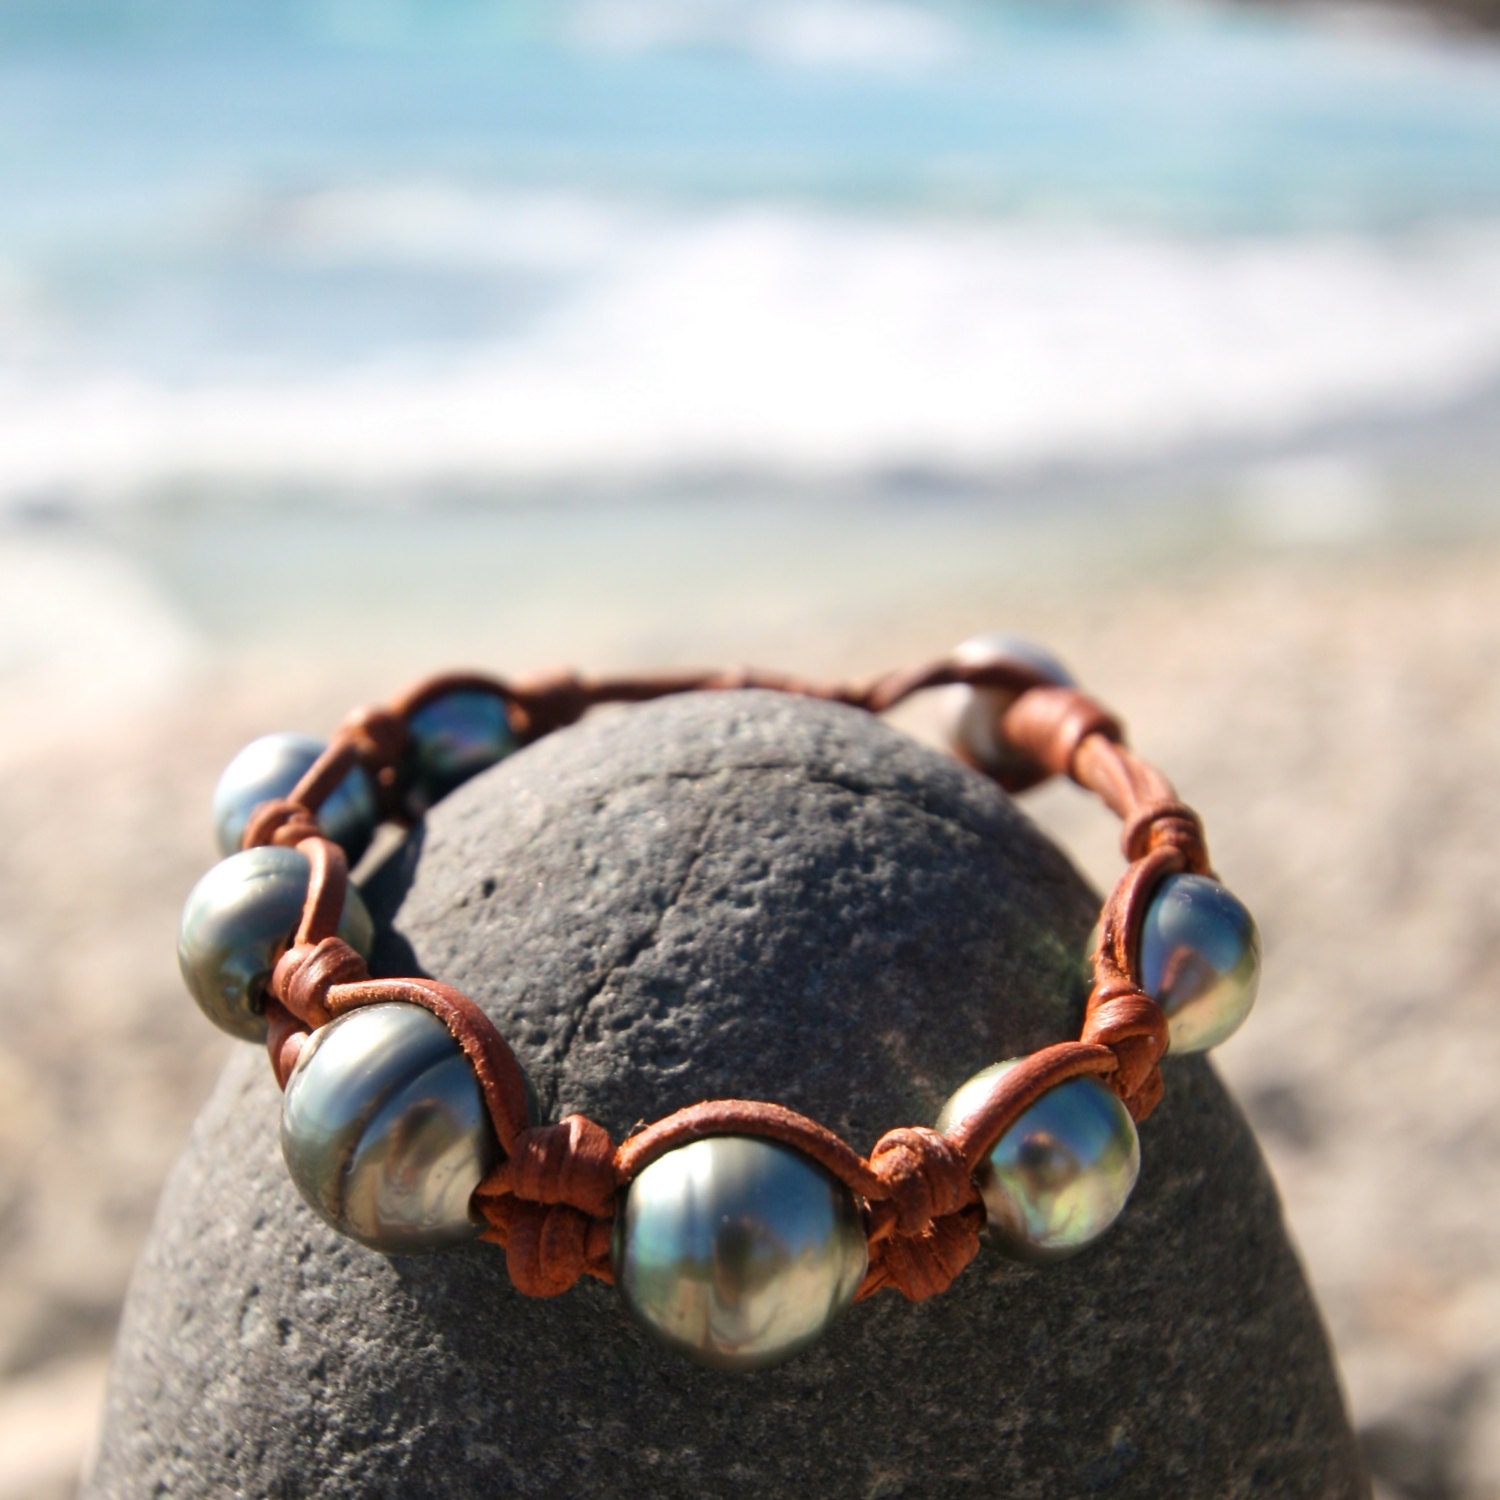 Knotted leather with great Tahitian black pearls, cultured pearl from Tahiti,  masculine bracelet, bohemian inspiration, boho, beach jewelry.